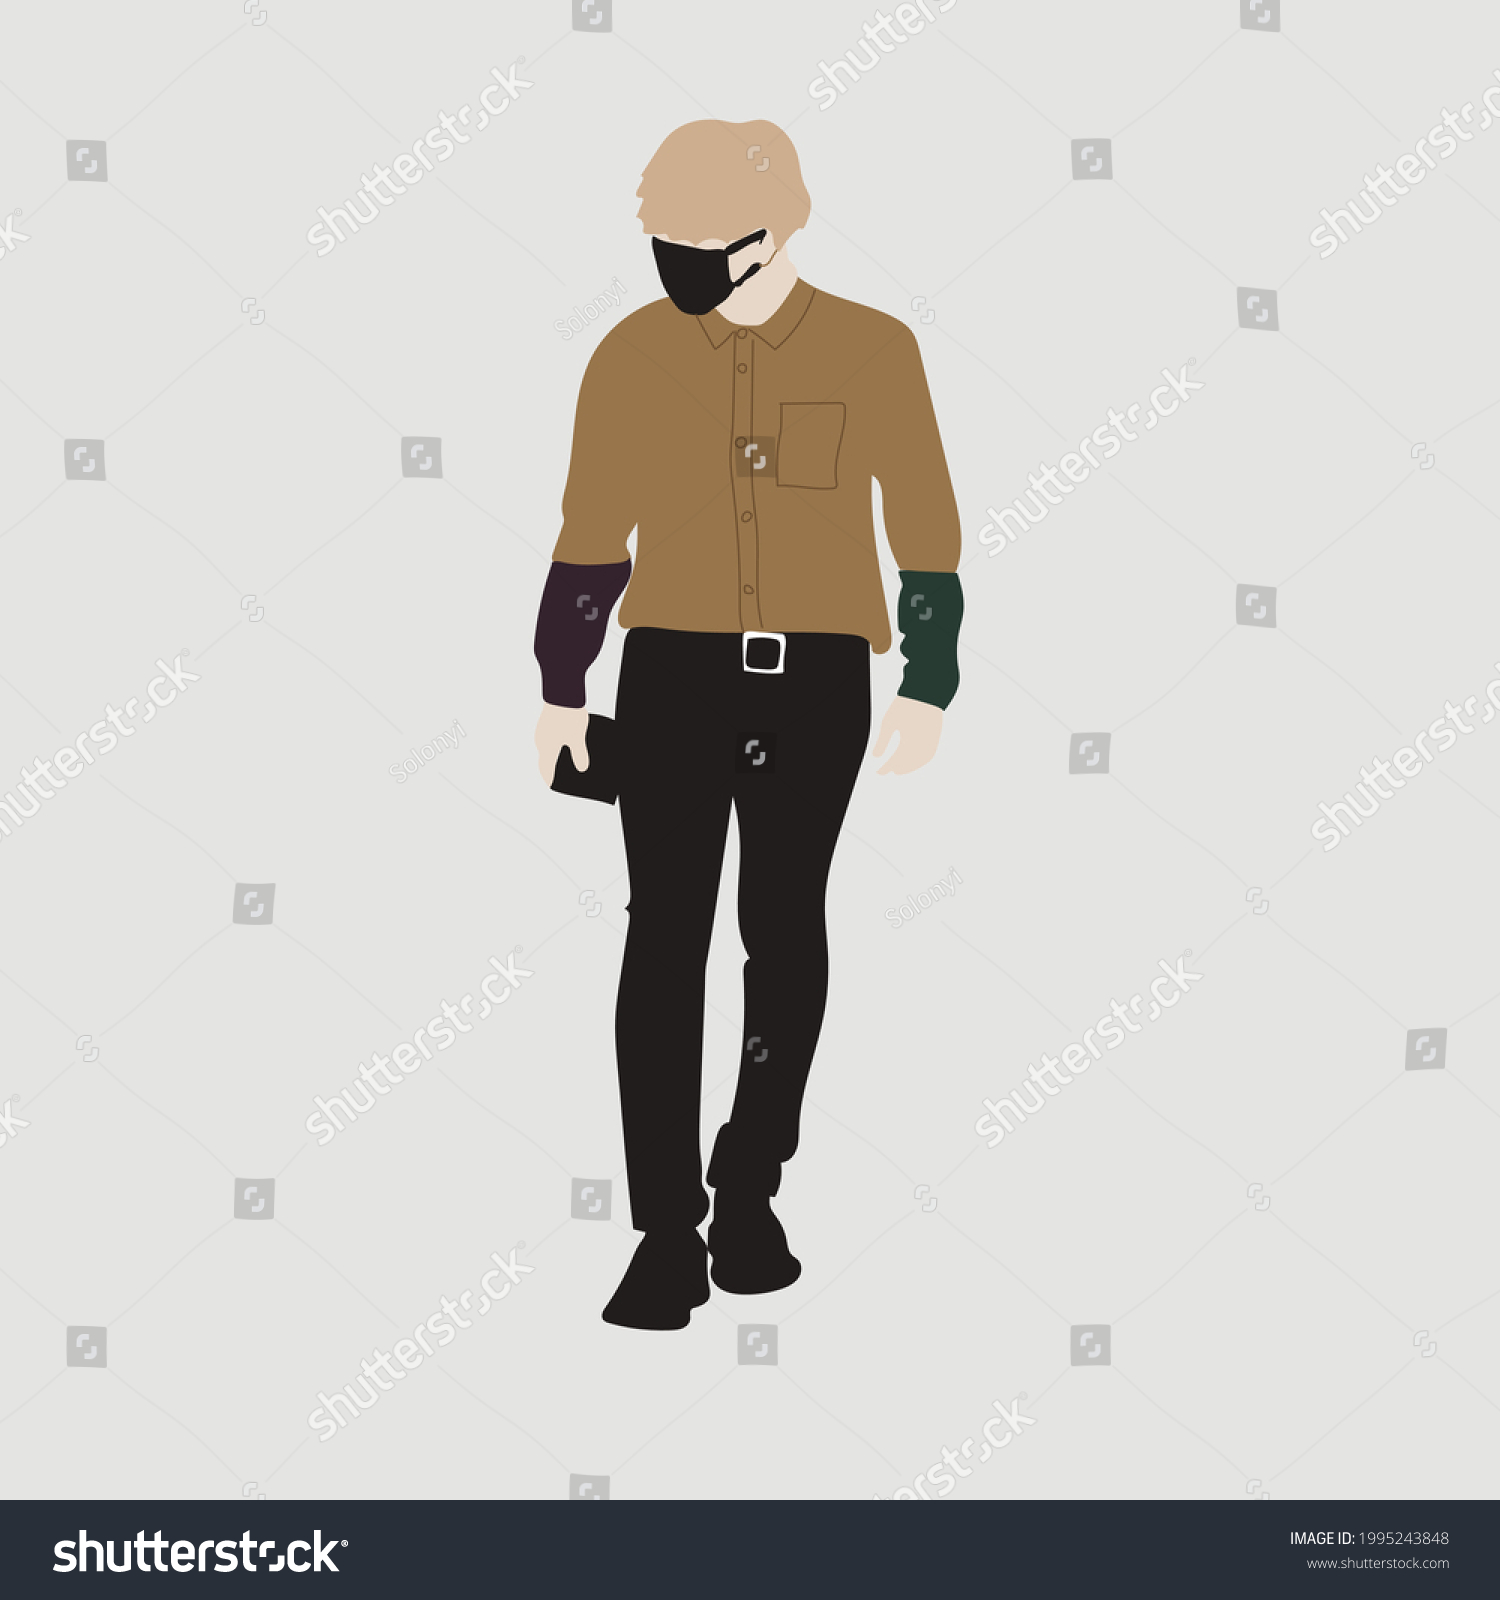 SVG of Vector illustration of Kpop street fashion. Street idols of Koreans. Kpop men's fashion idol.A guy in black jeans and a shirt with a mask on his face. svg